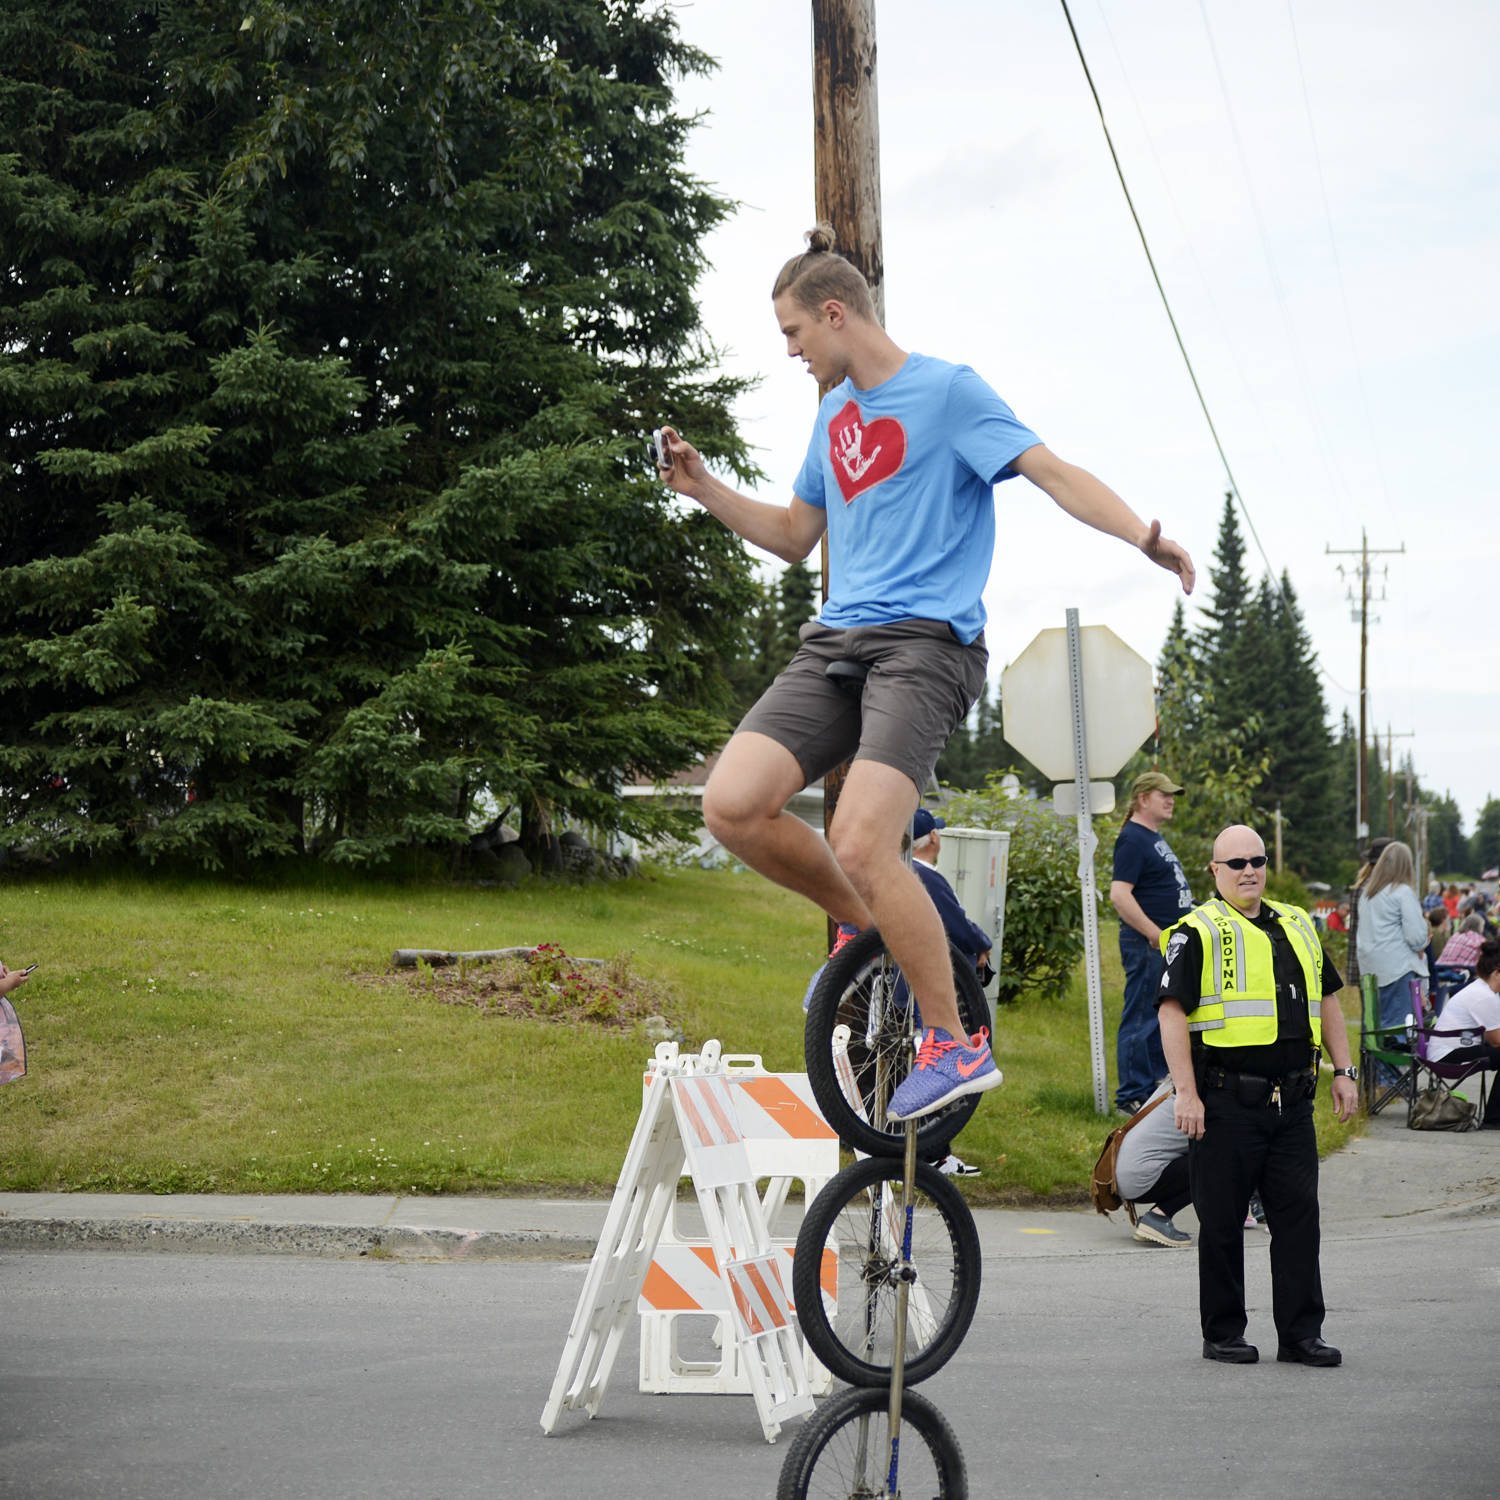 Josiah Martin of Soldotna deftly perches atop a unicycle during the Progress Days parade on Saturday, July 28, 2018 in Soldotna, Alaska. The parade kicks off the weekend-long event celebrating Soldotna’s history, with a market on Saturday and Sunday in Soldotna Creek Park and a concert Saturday night followed by a free community barbecue Sunday. (Photo by Elizabeth Earl/Peninsula Clarion)